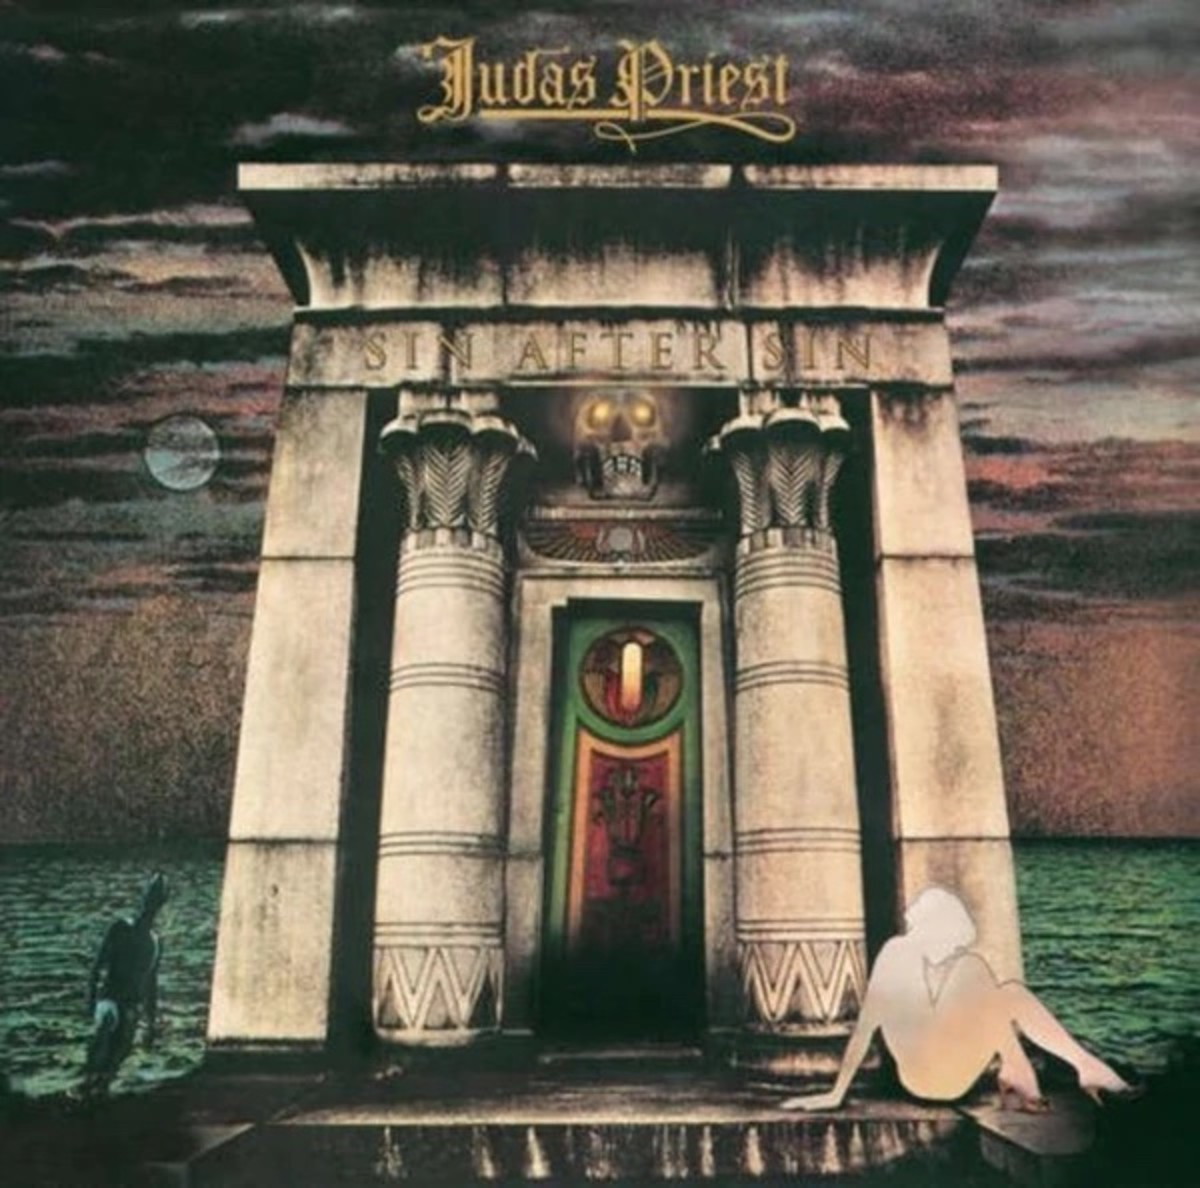 The song "Sinner" leads off the 1977 Judas Priest album Sin After Sin.